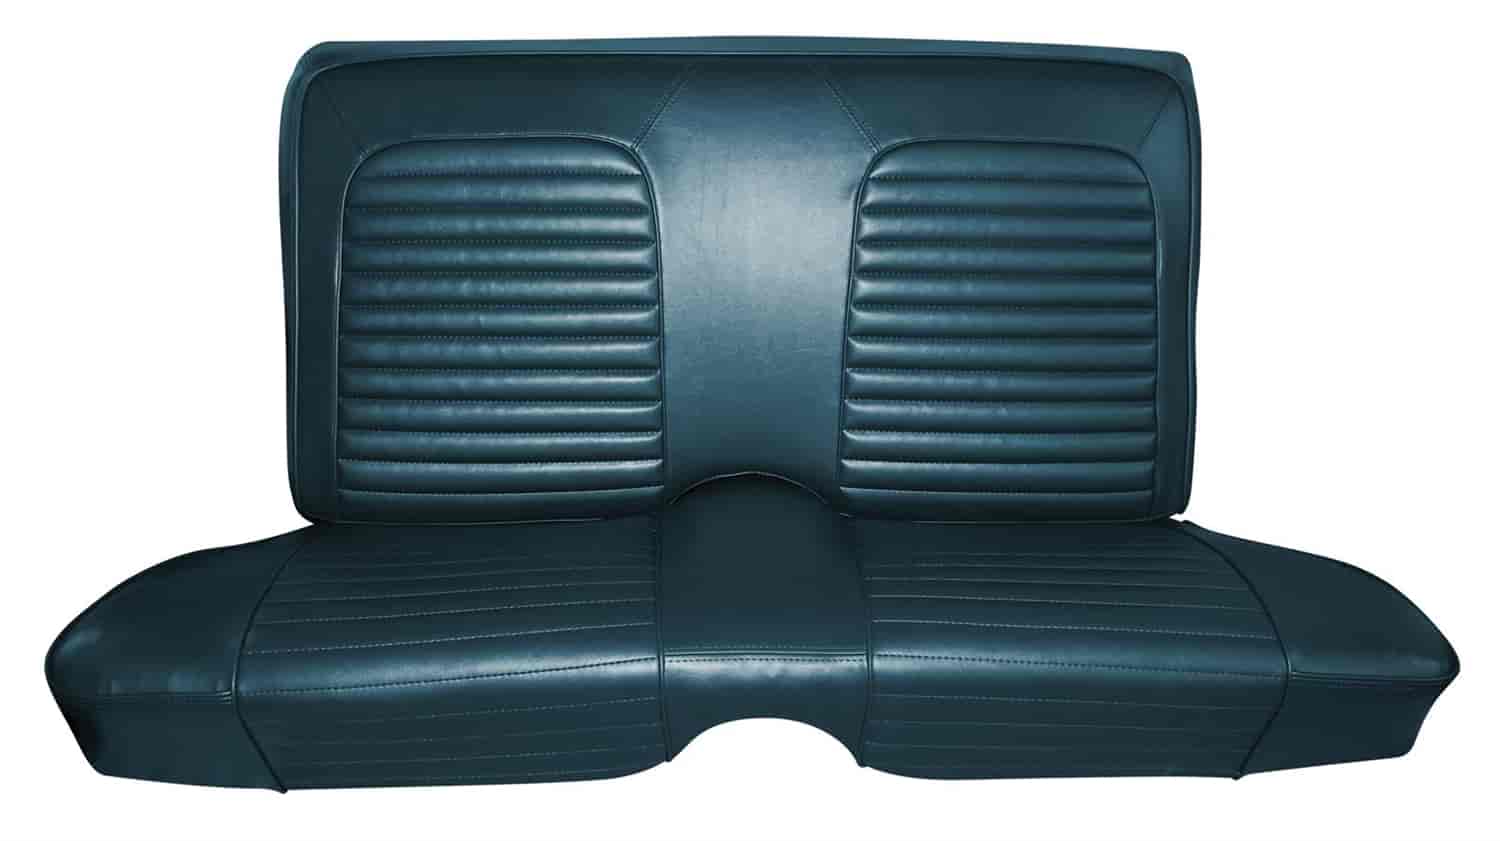 1963 Ford Falcon Futura 4-Door Sedan Interior Rear Bench Seat Upholstery for Vehicles with a Front Bench Seat